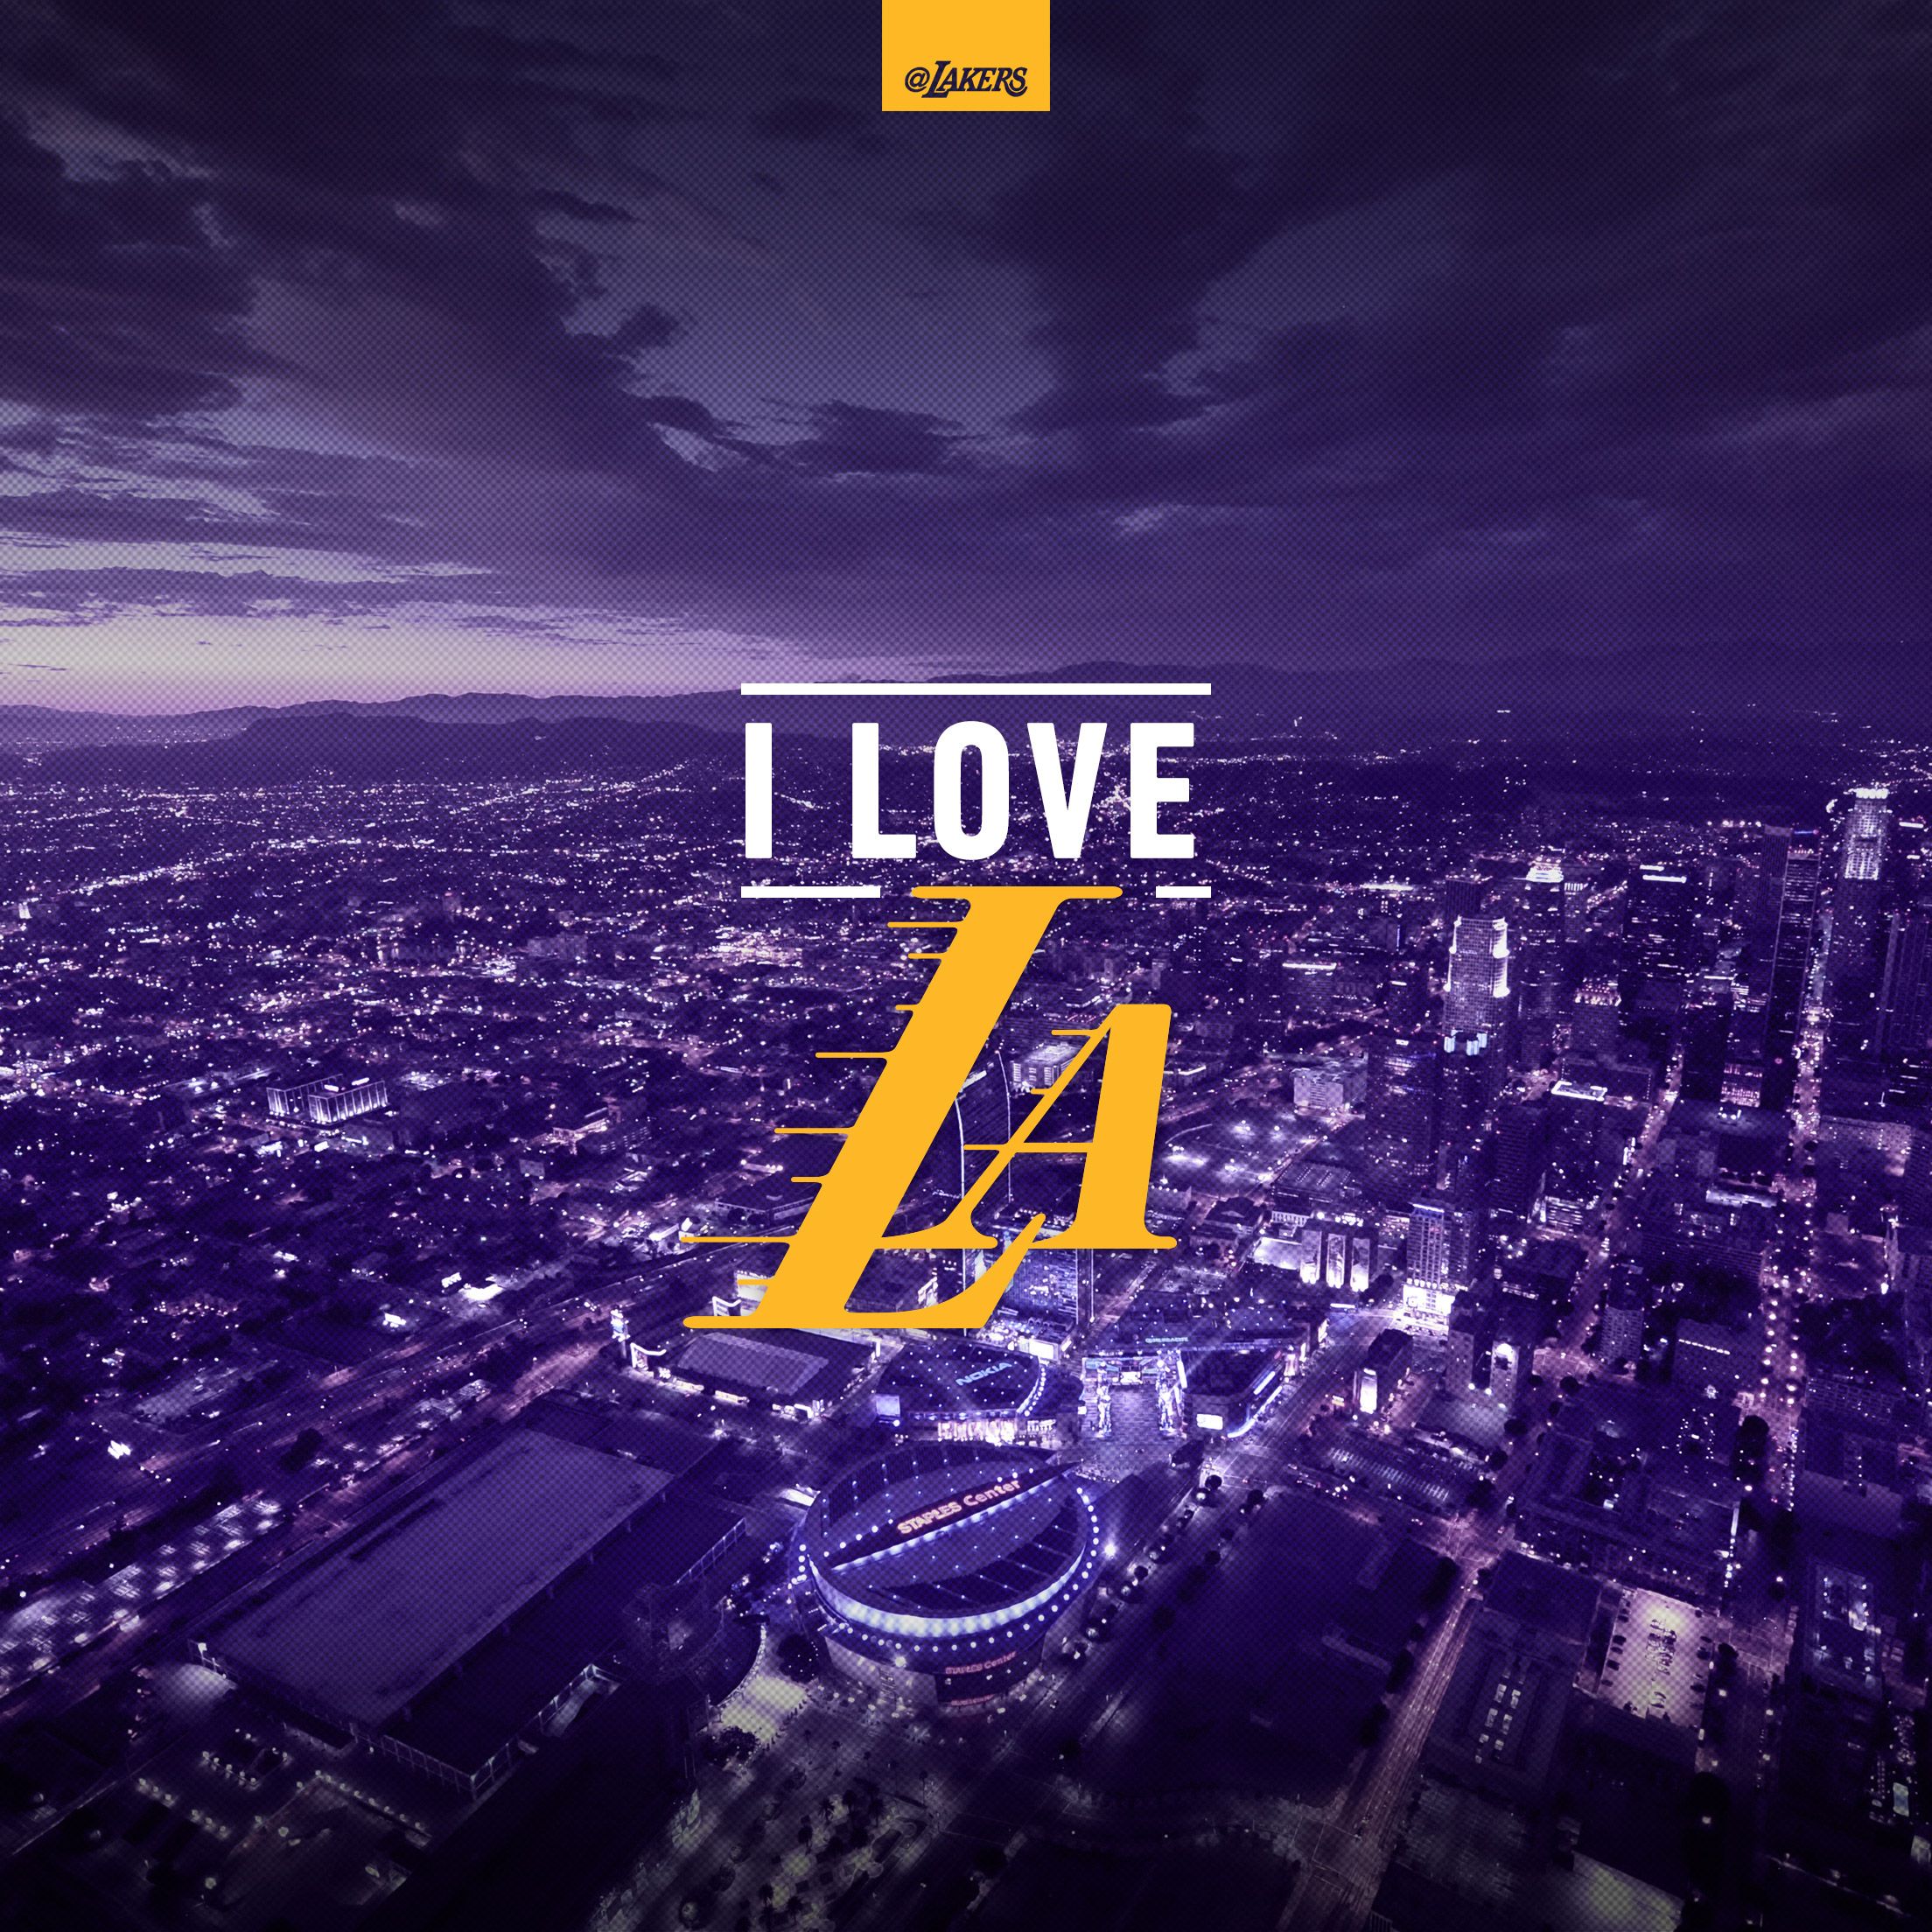 Lakers Wallpaper and Infographics. Los Angeles Lakers. Lakers wallpaper, iPhone wallpaper nba, Los angeles lakers